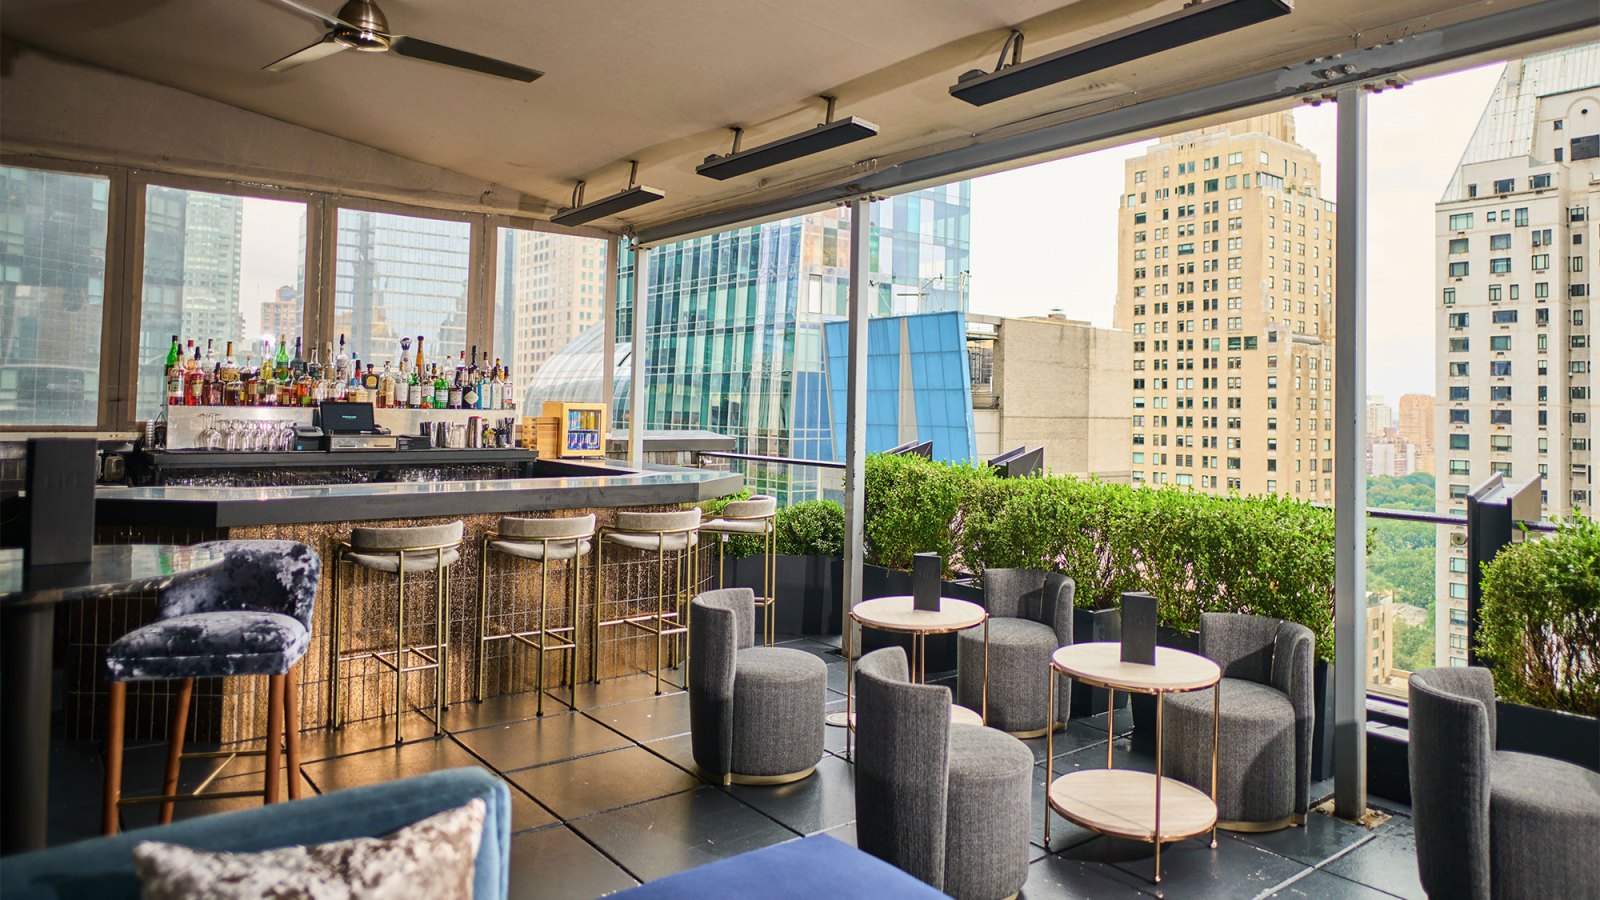 NYCs Life Rooftop Shows Off the City's Iconic Views at its Central Park Location